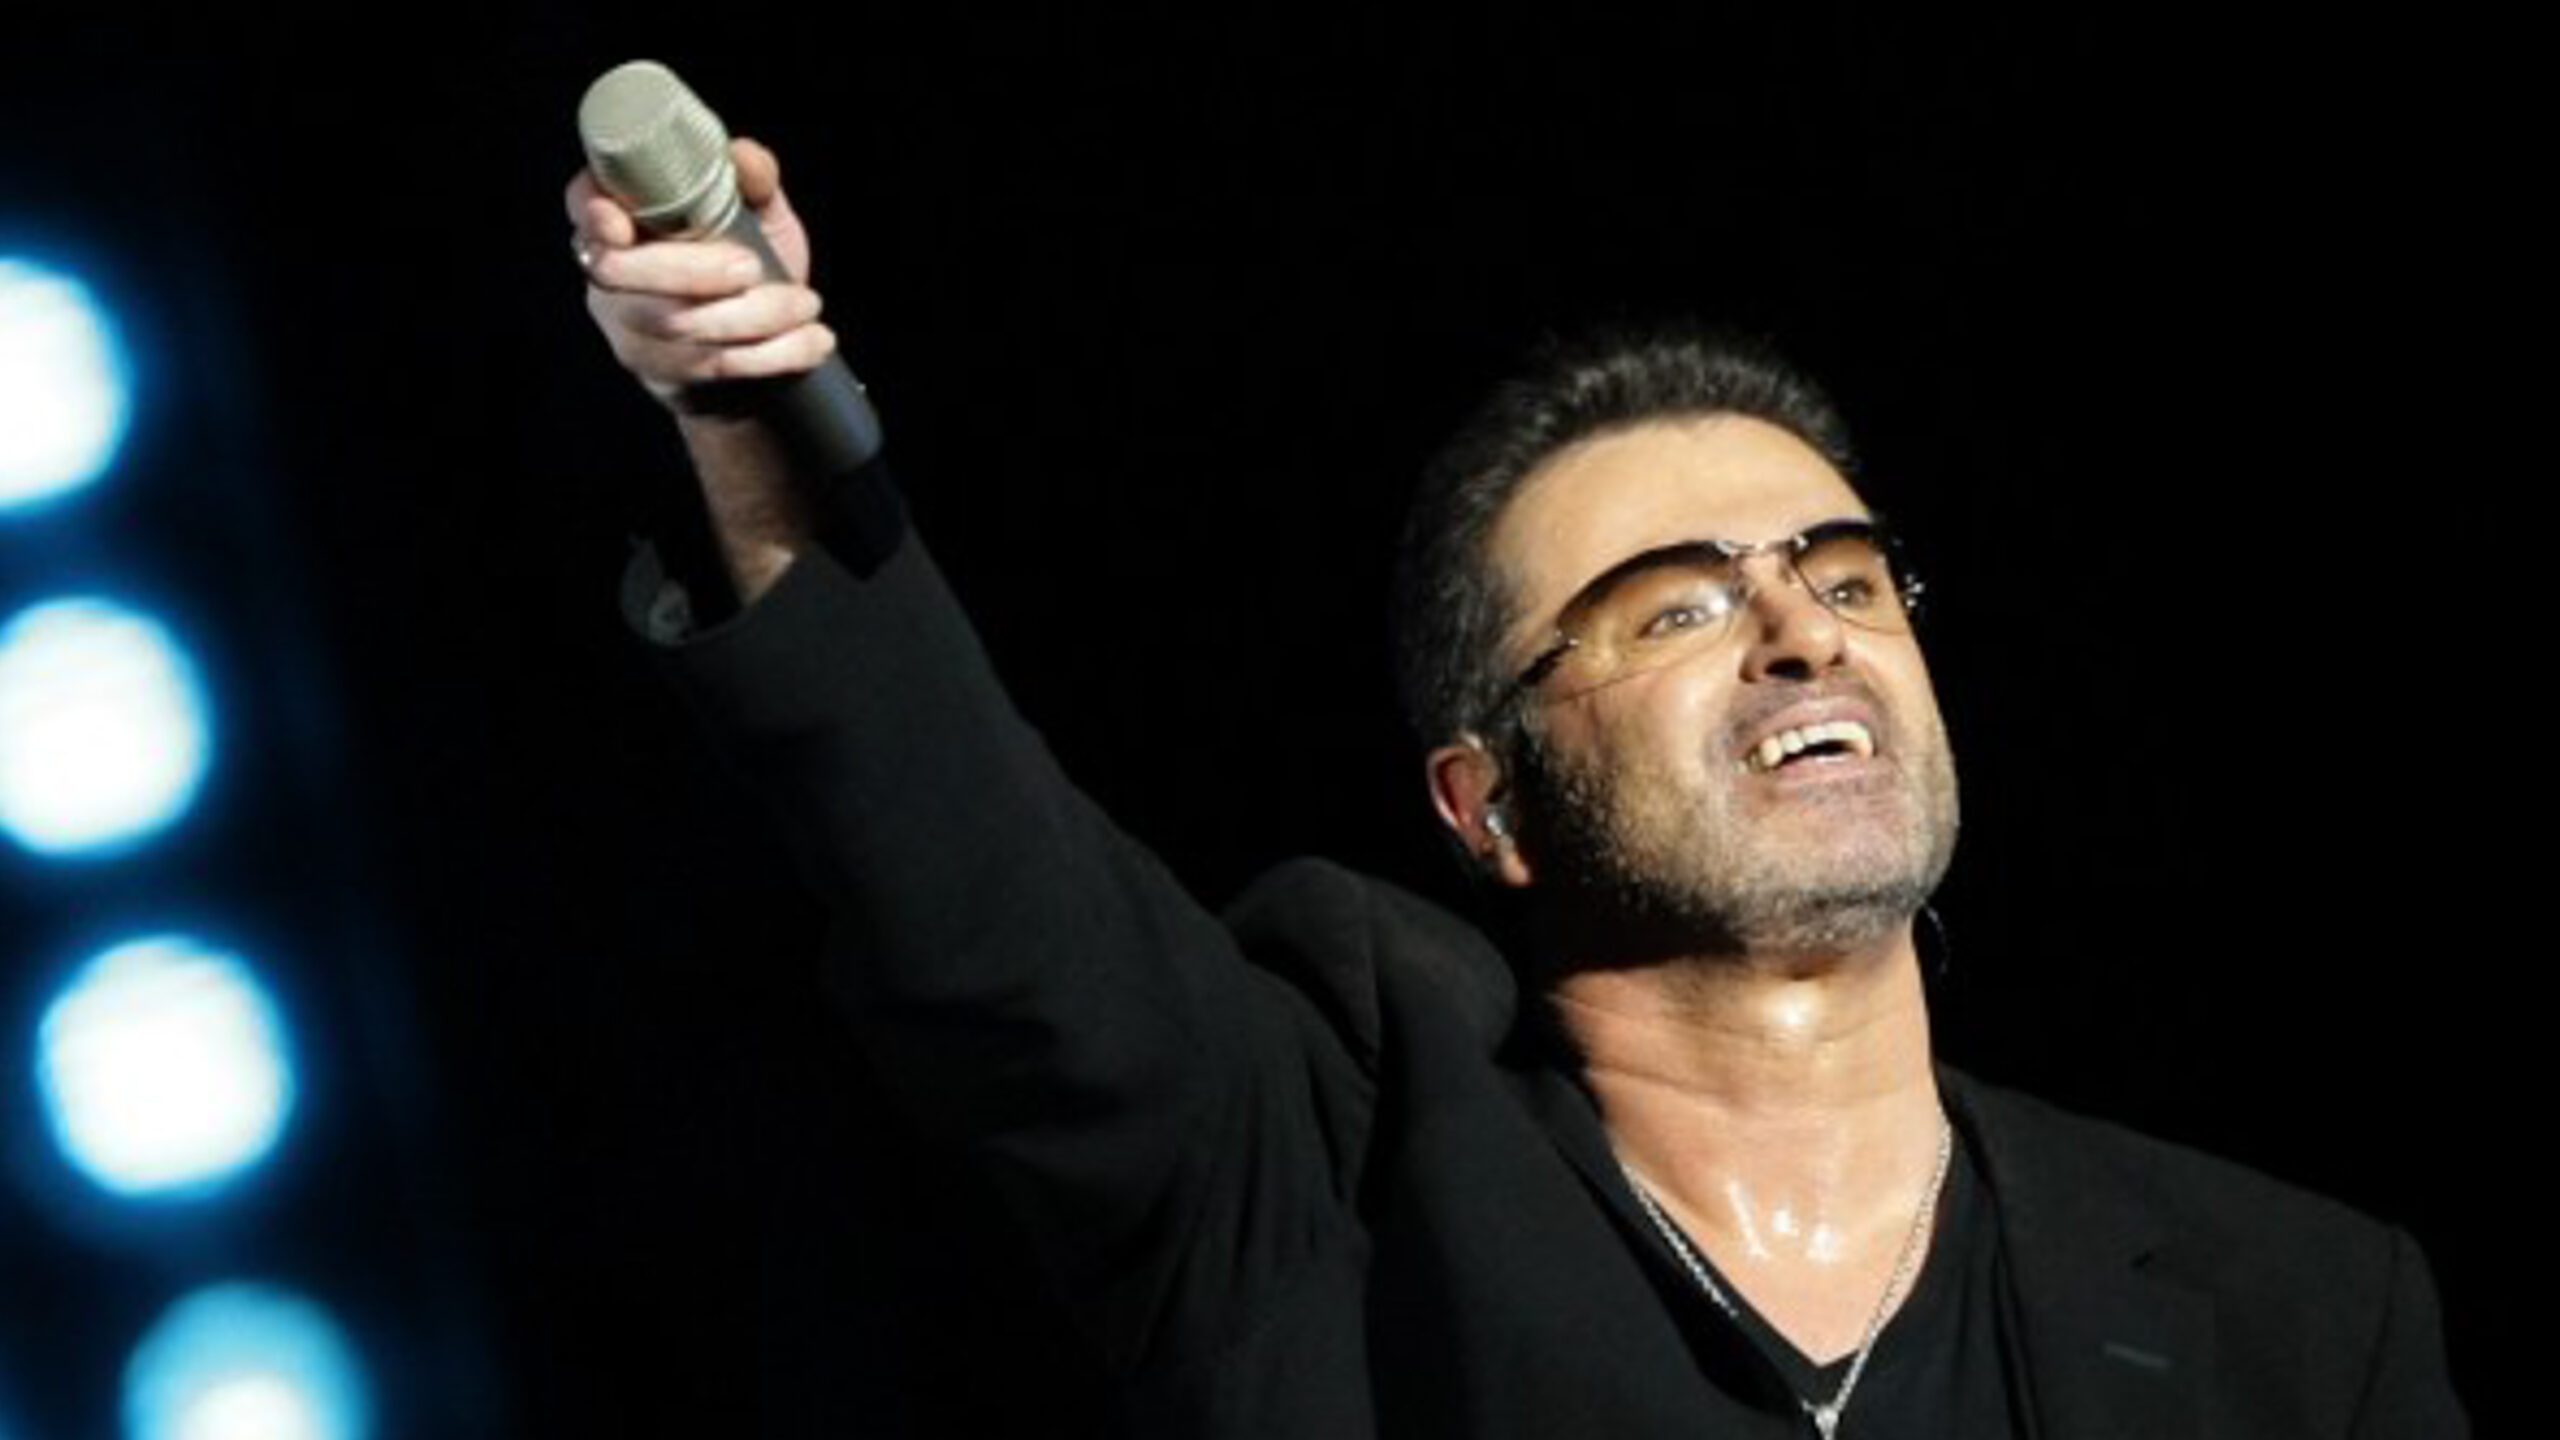 George Michael died of natural causes – coroner